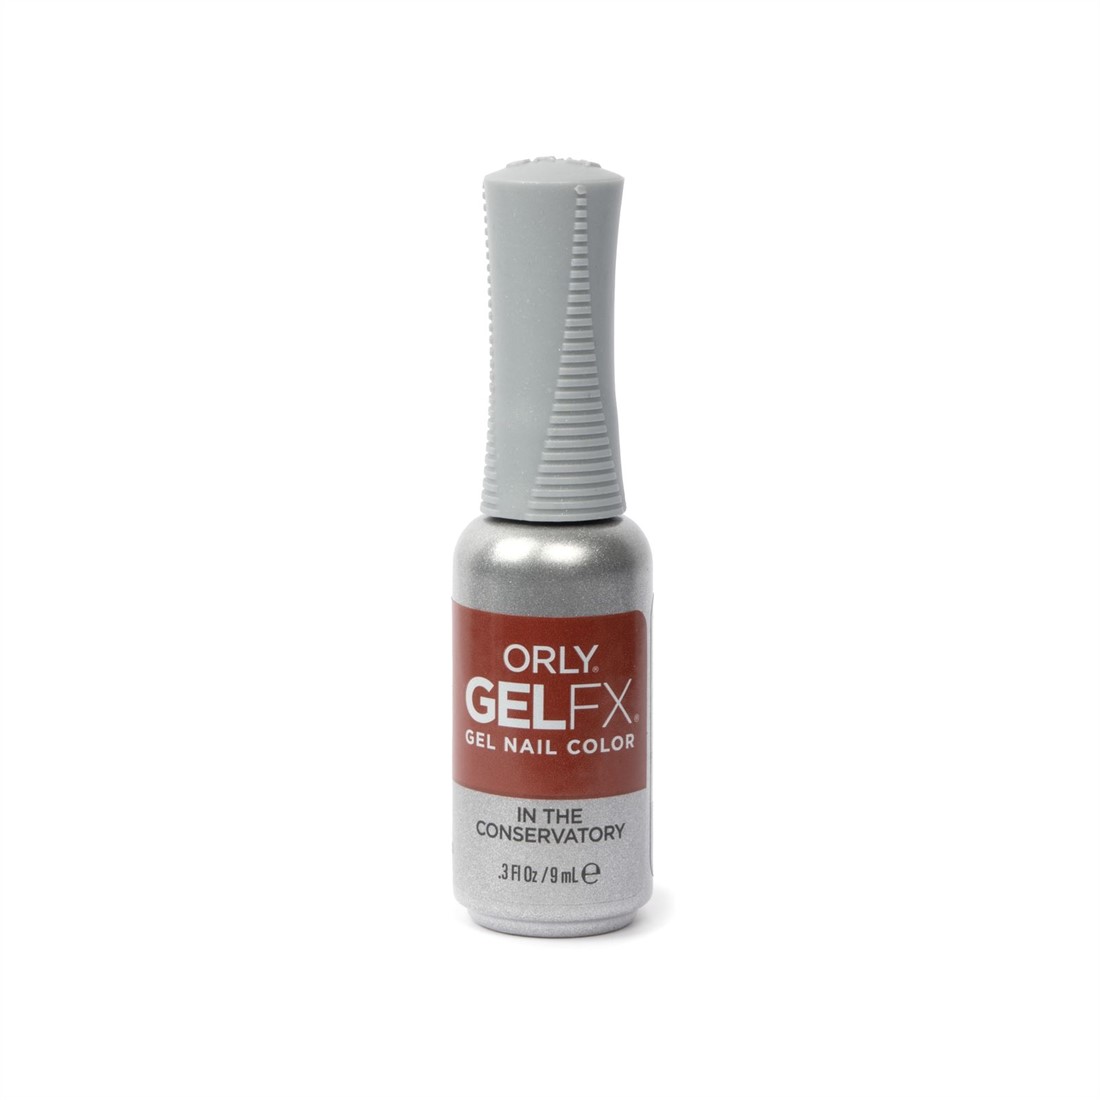 orly-gelfx-in-the-conservatory-9ml